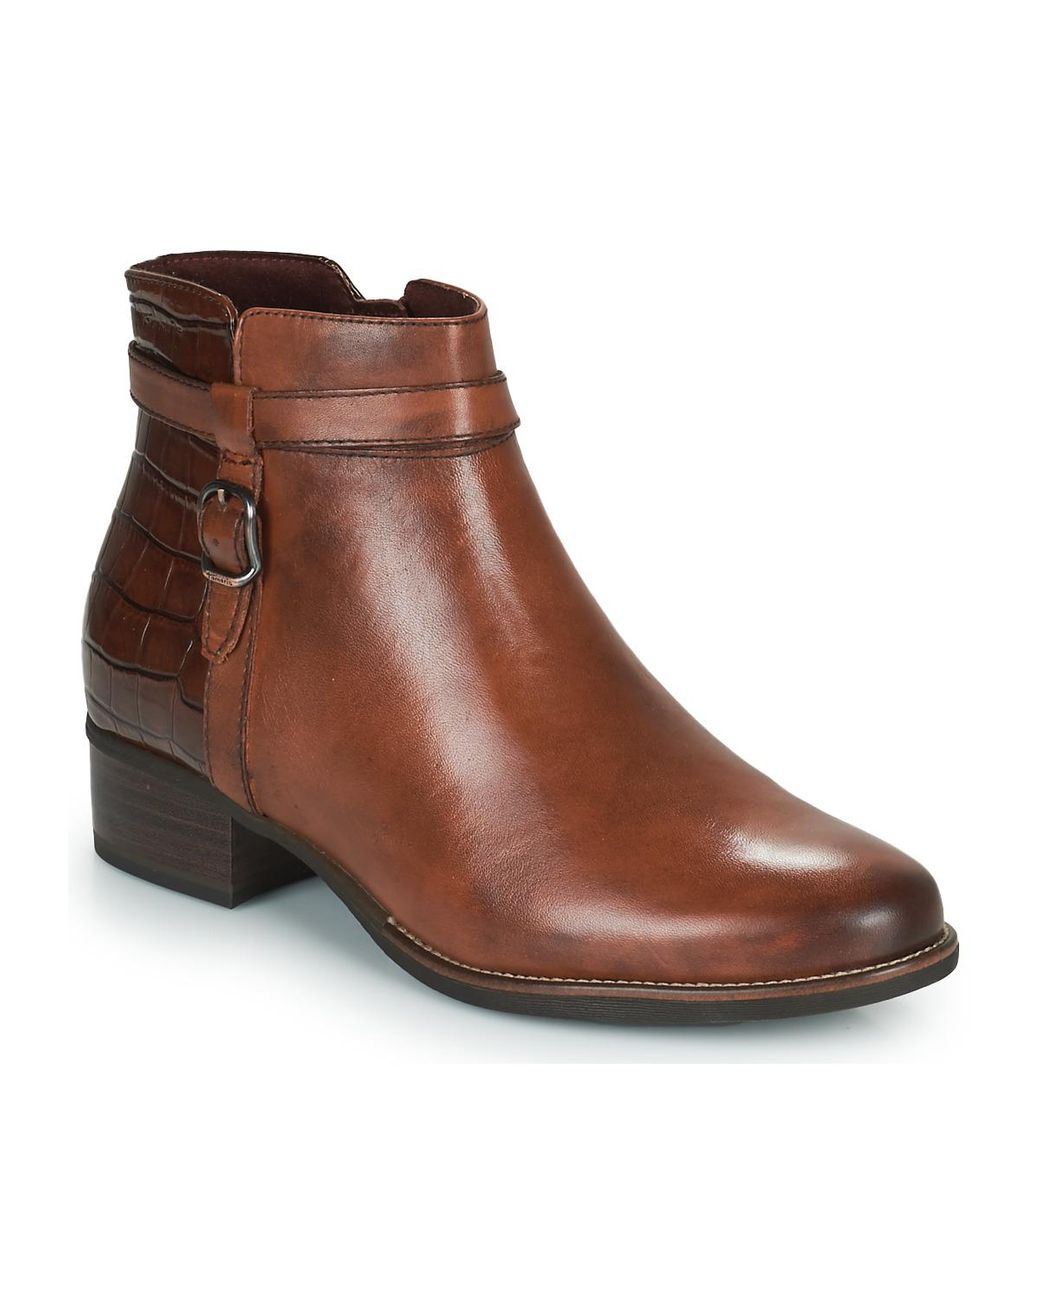 Tamaris Marly Low Ankle Boots in Brown - Save 3% - Lyst